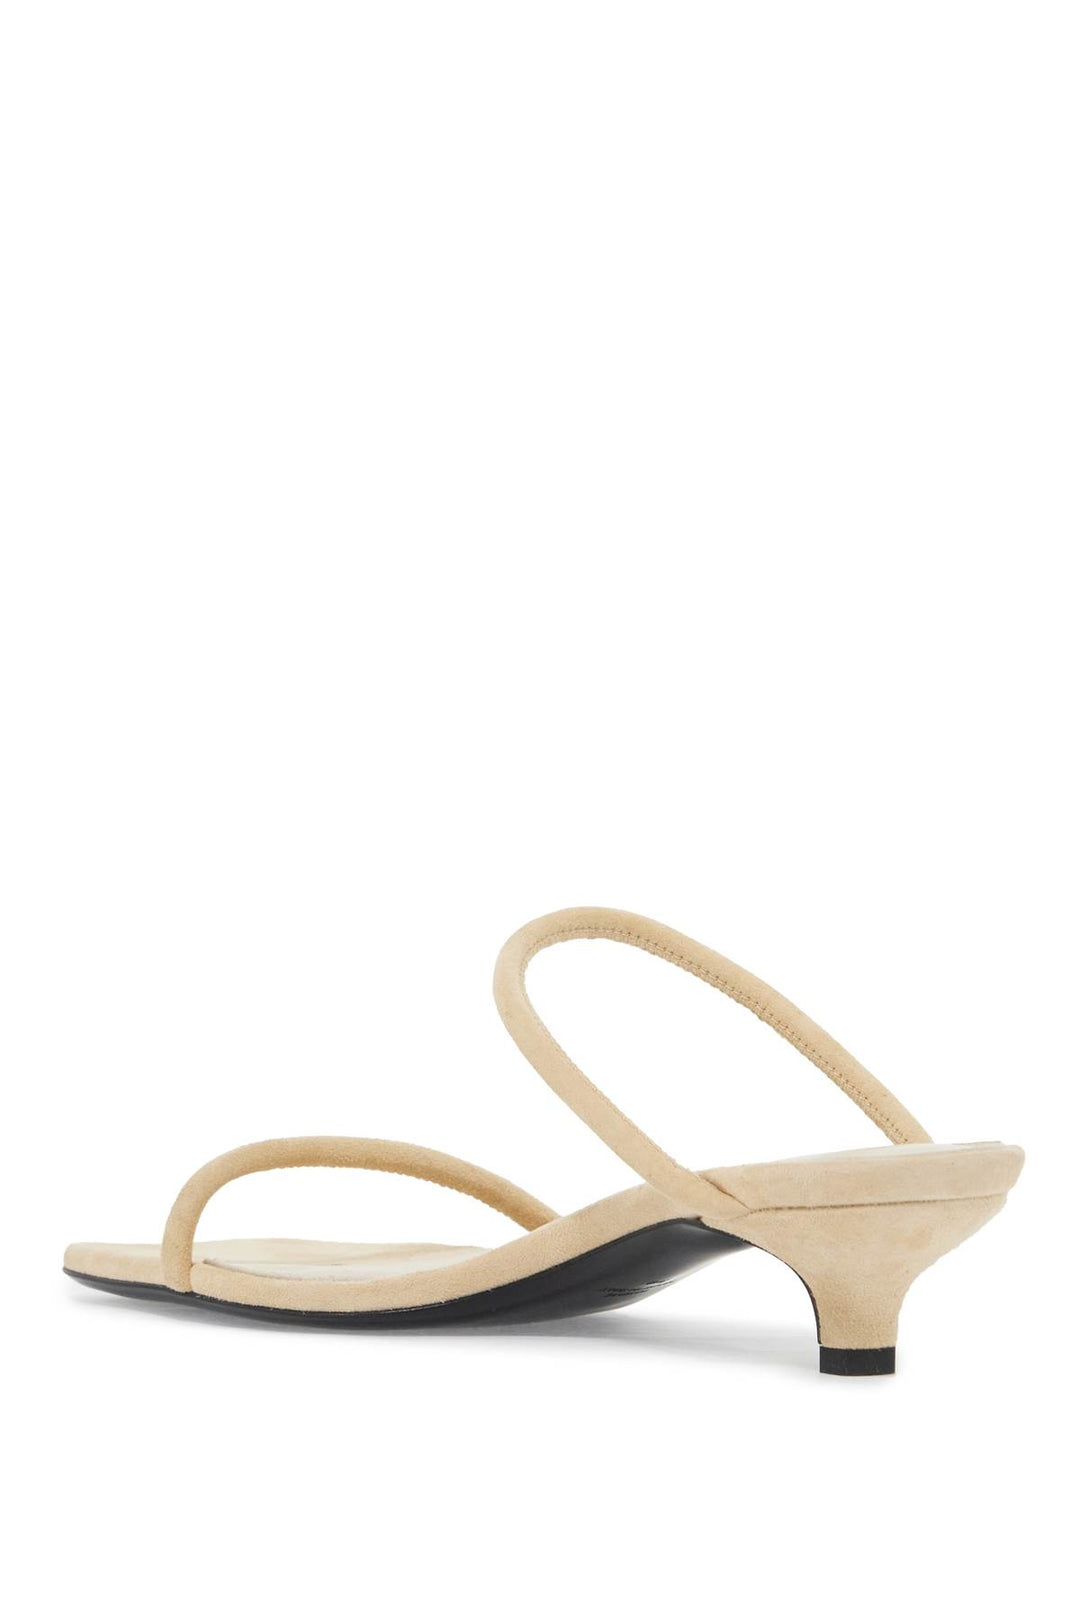 Toteme Minimalist Suede Leather Sandals   Neutral